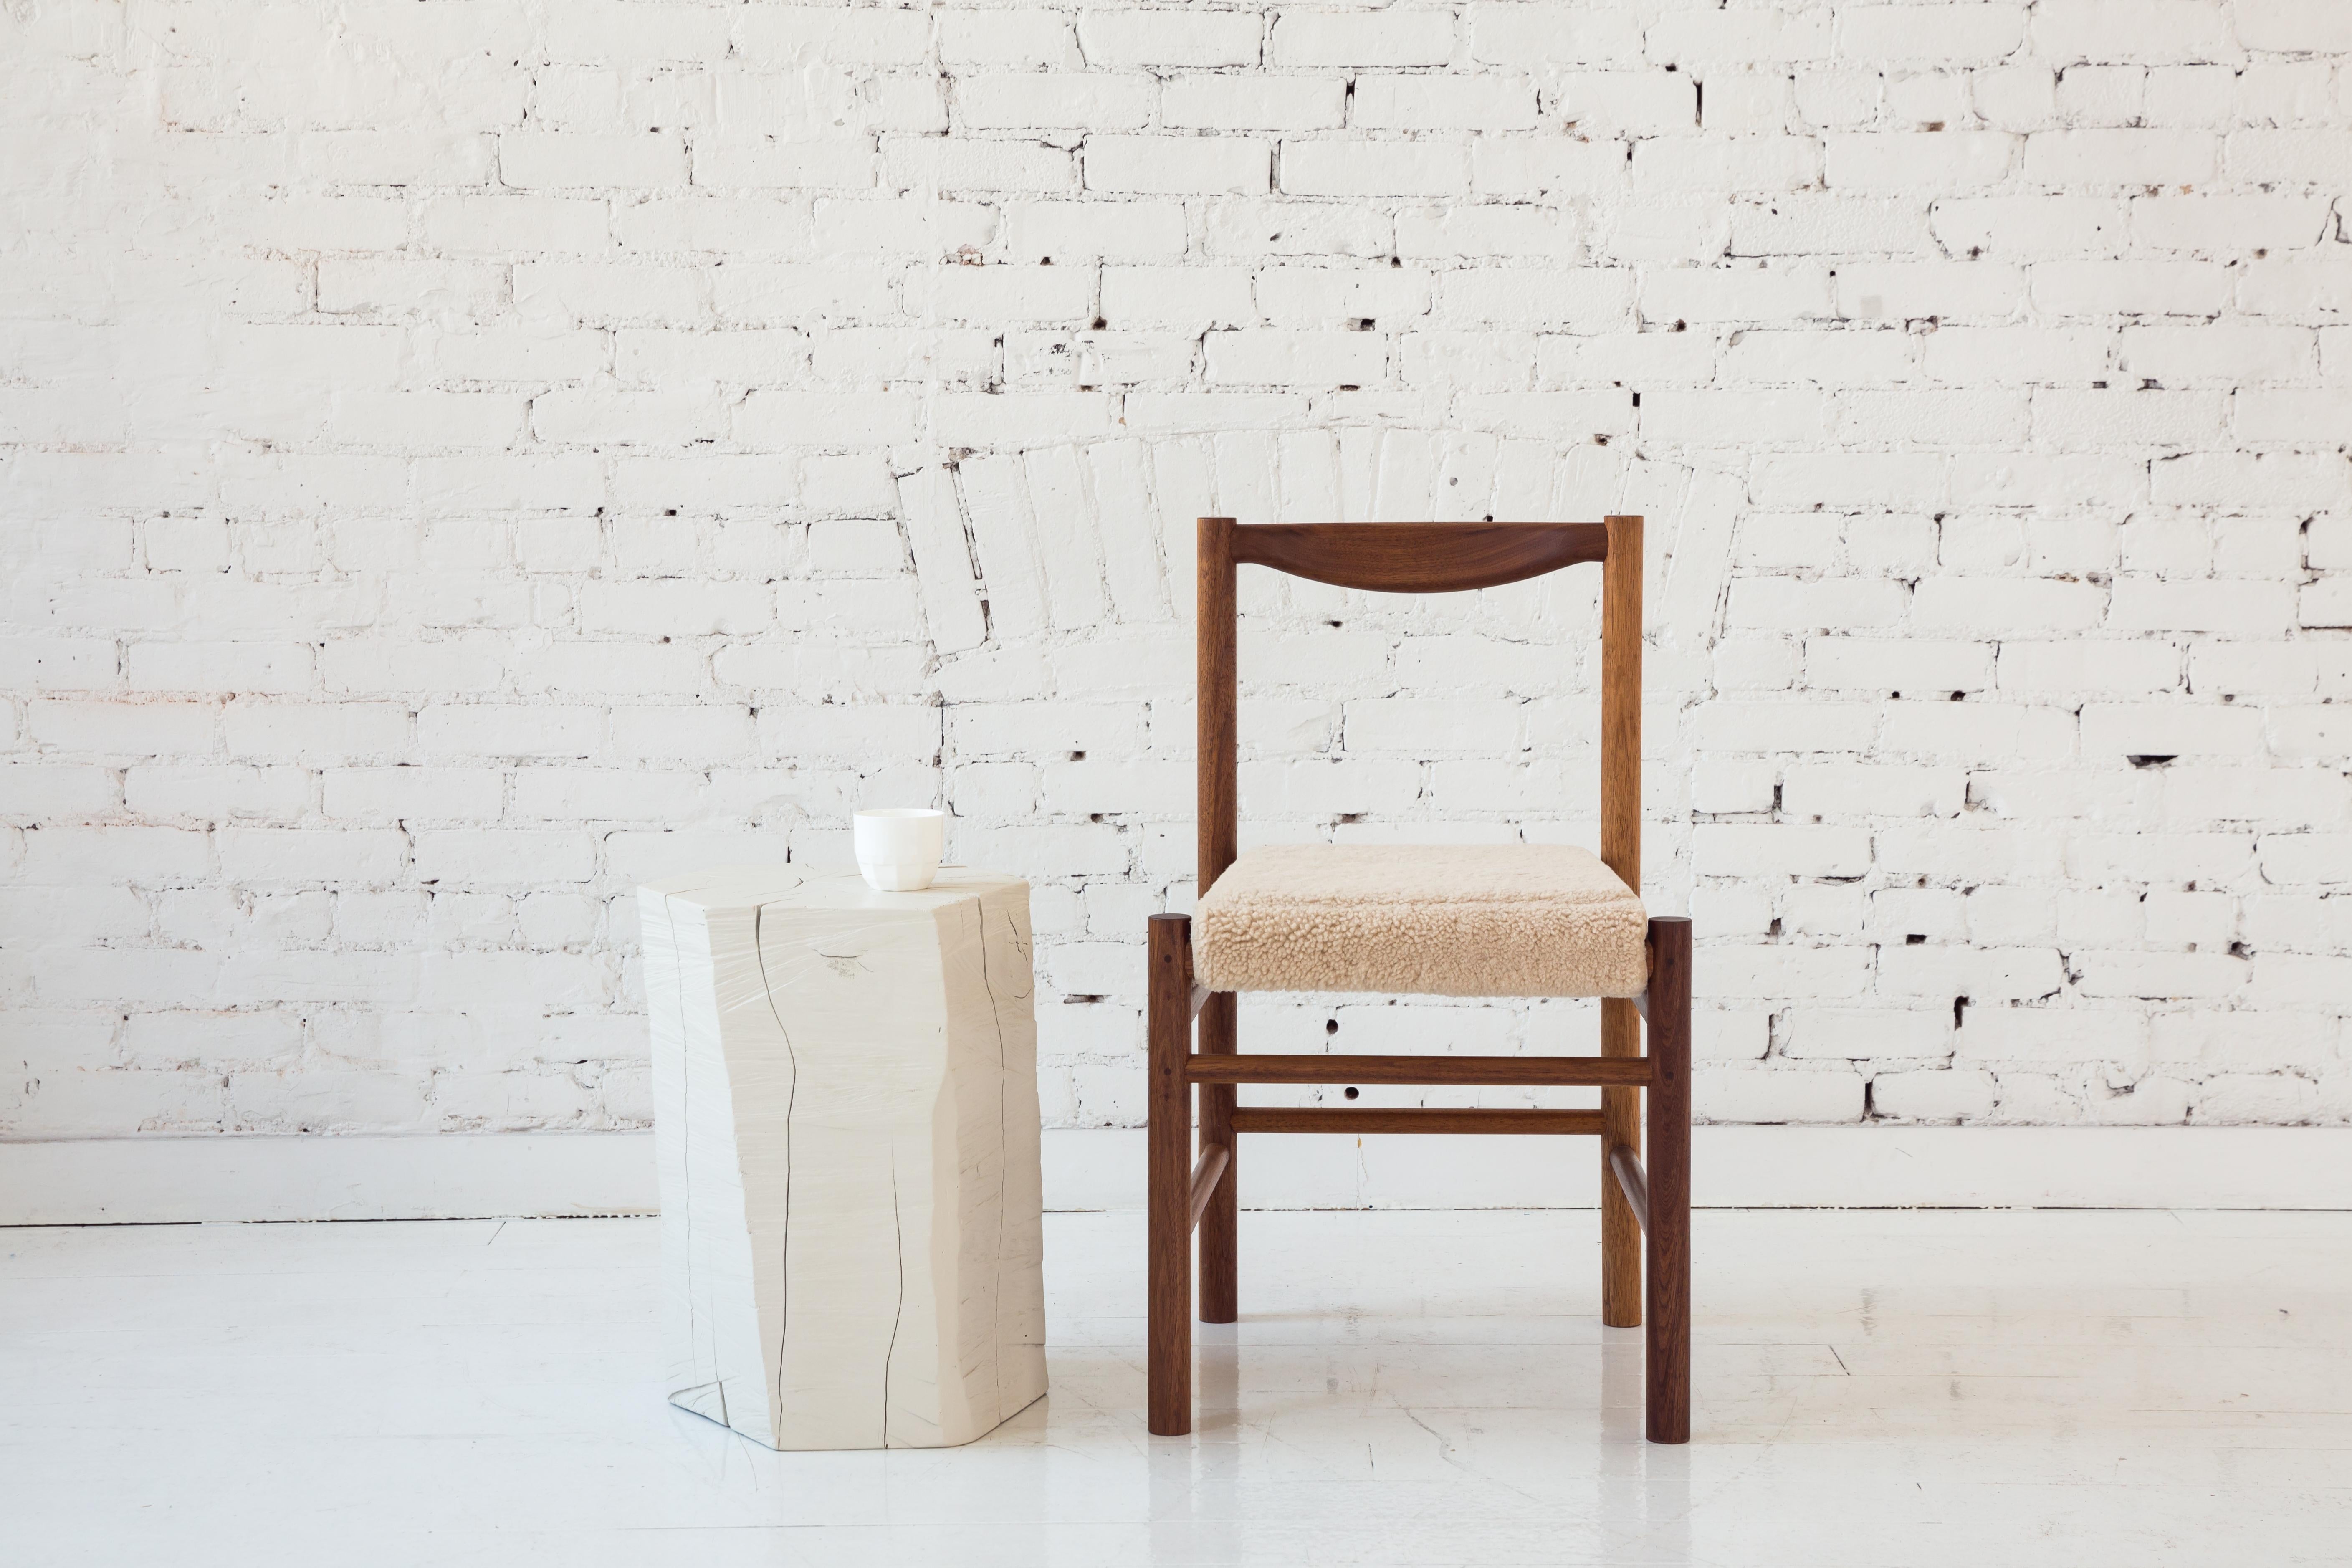 Shaker inspired wood side chair with comfortable contoured backrest. Option for a plain wooden seat pan or a seat pan with a low profile leather or shearling pad. This chair's simplicity makes it versatile to work perfectly in many different